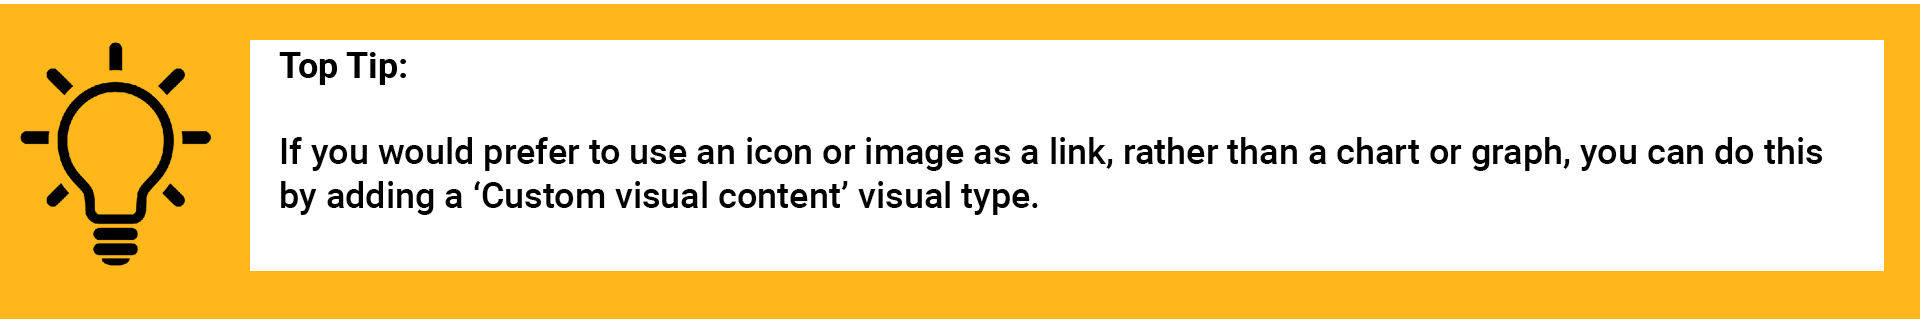 if you would prefer to use an icon or image as a link, rather than a chart or graph, you can do this by adding a ‘Custom visual content’ visual type. 